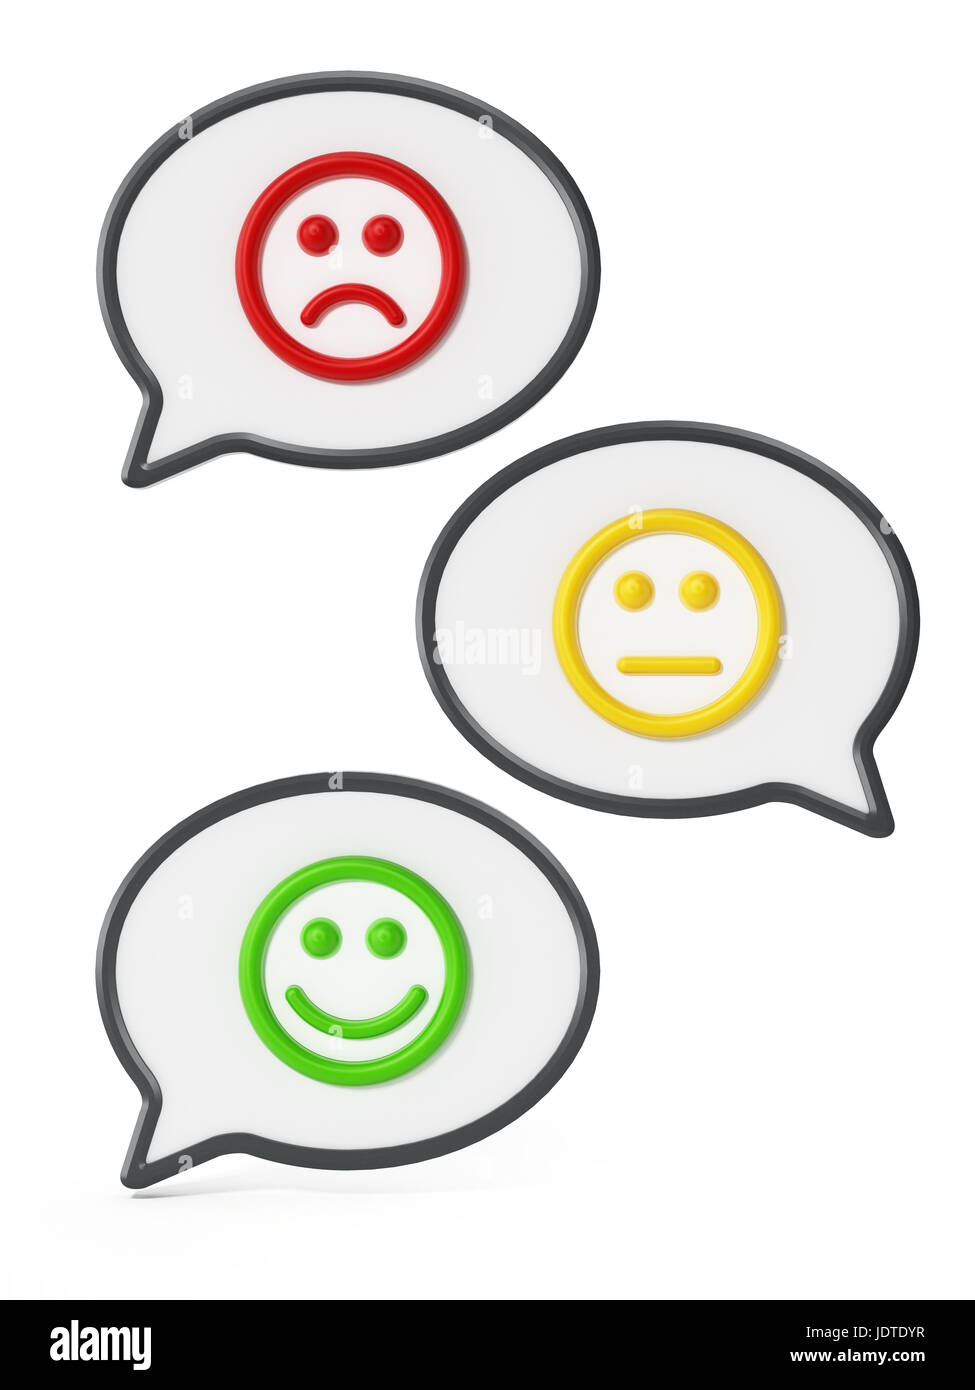 Green, yellow and red faces inside speech balloons showing satisfaction levels. 3D illustration. Stock Photo